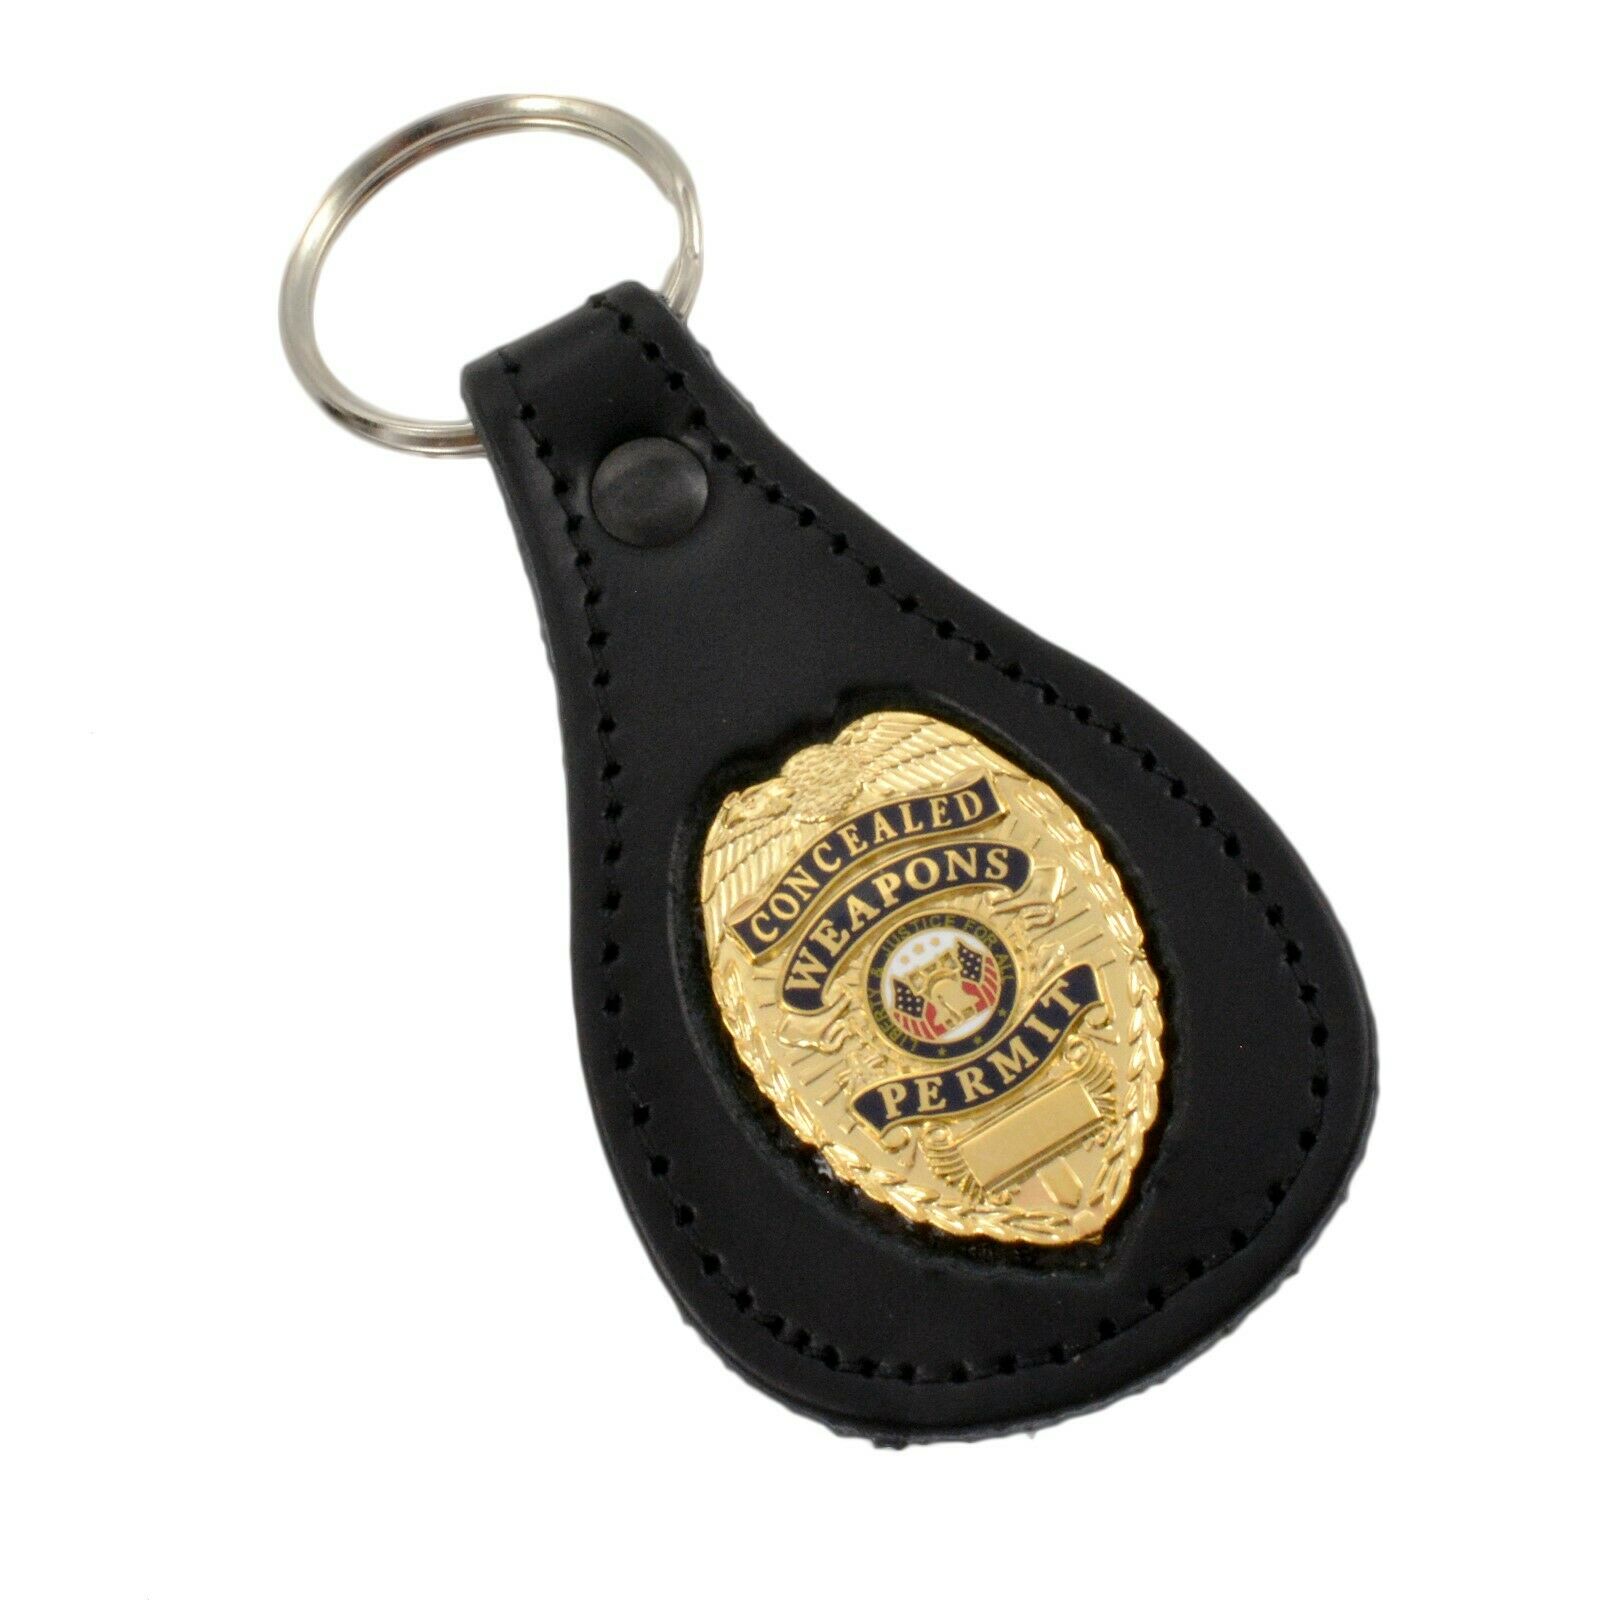 Gold Concealed Weapons Permit Badge Leather Key Fob Keychain Keyring Quality